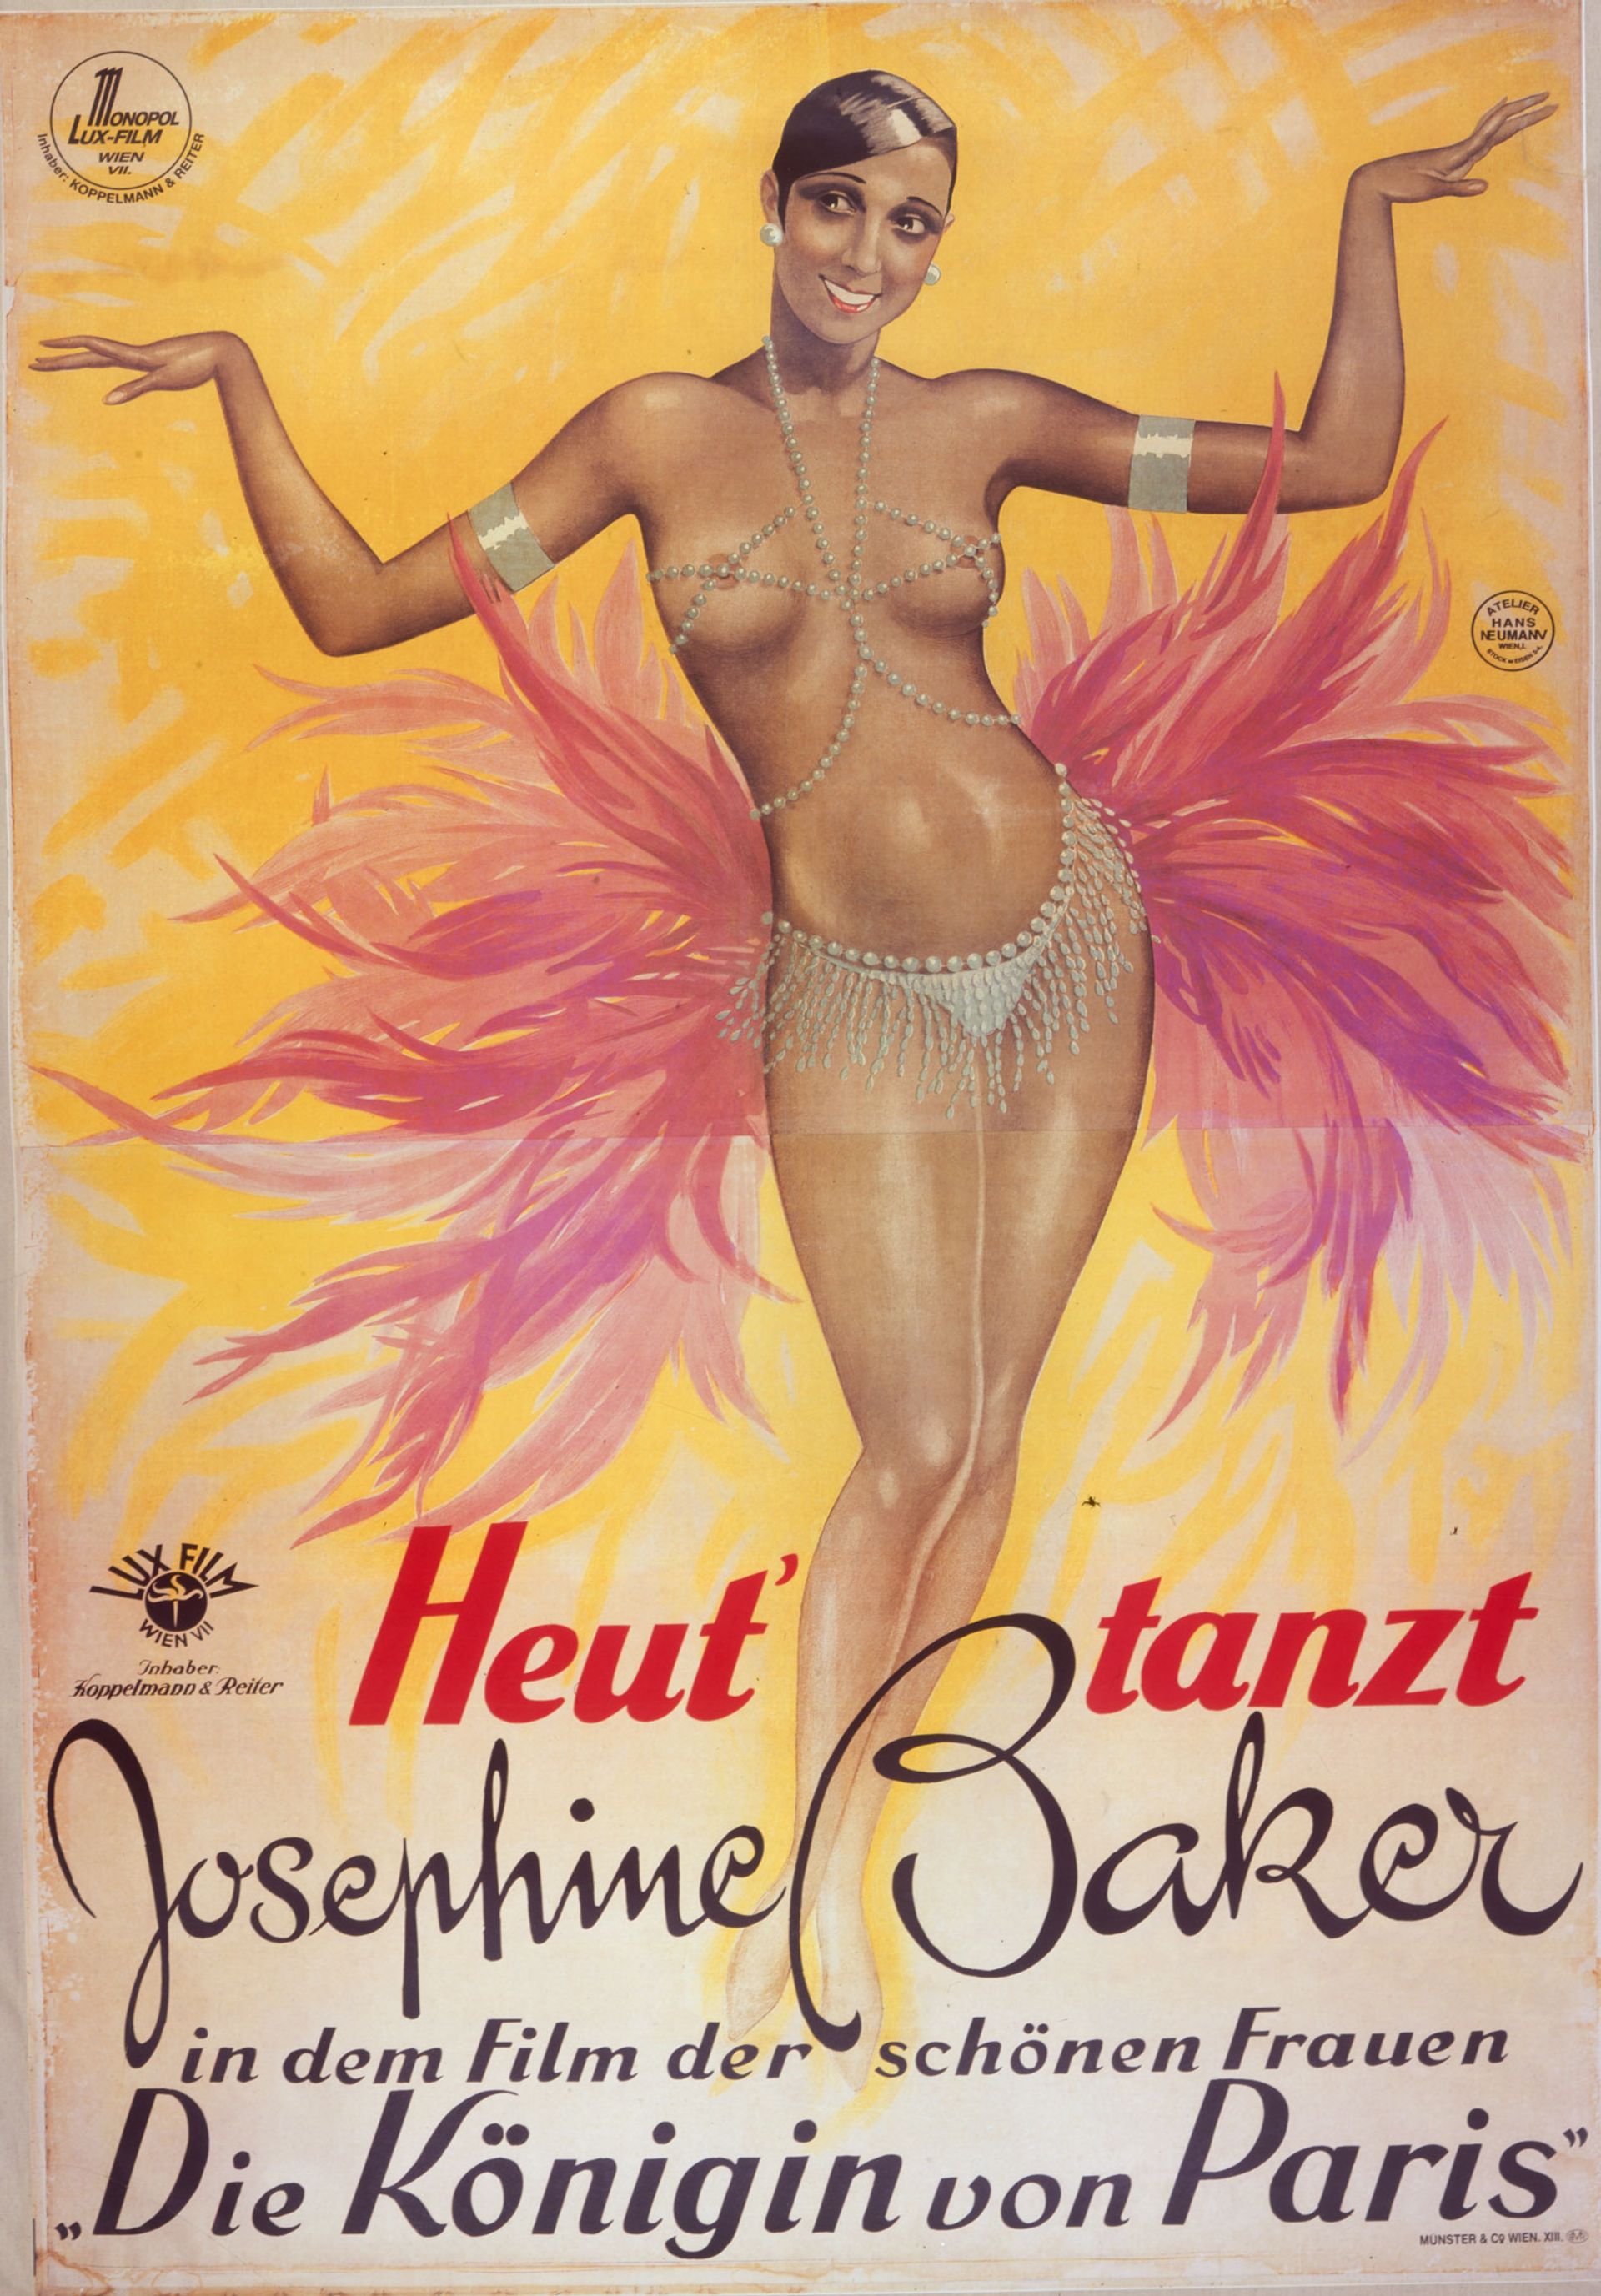 The 1927 poster for Heut' Tanzt staring Josephine Baker Photo: Courtesy of the Lucas Museum of Narrative Art